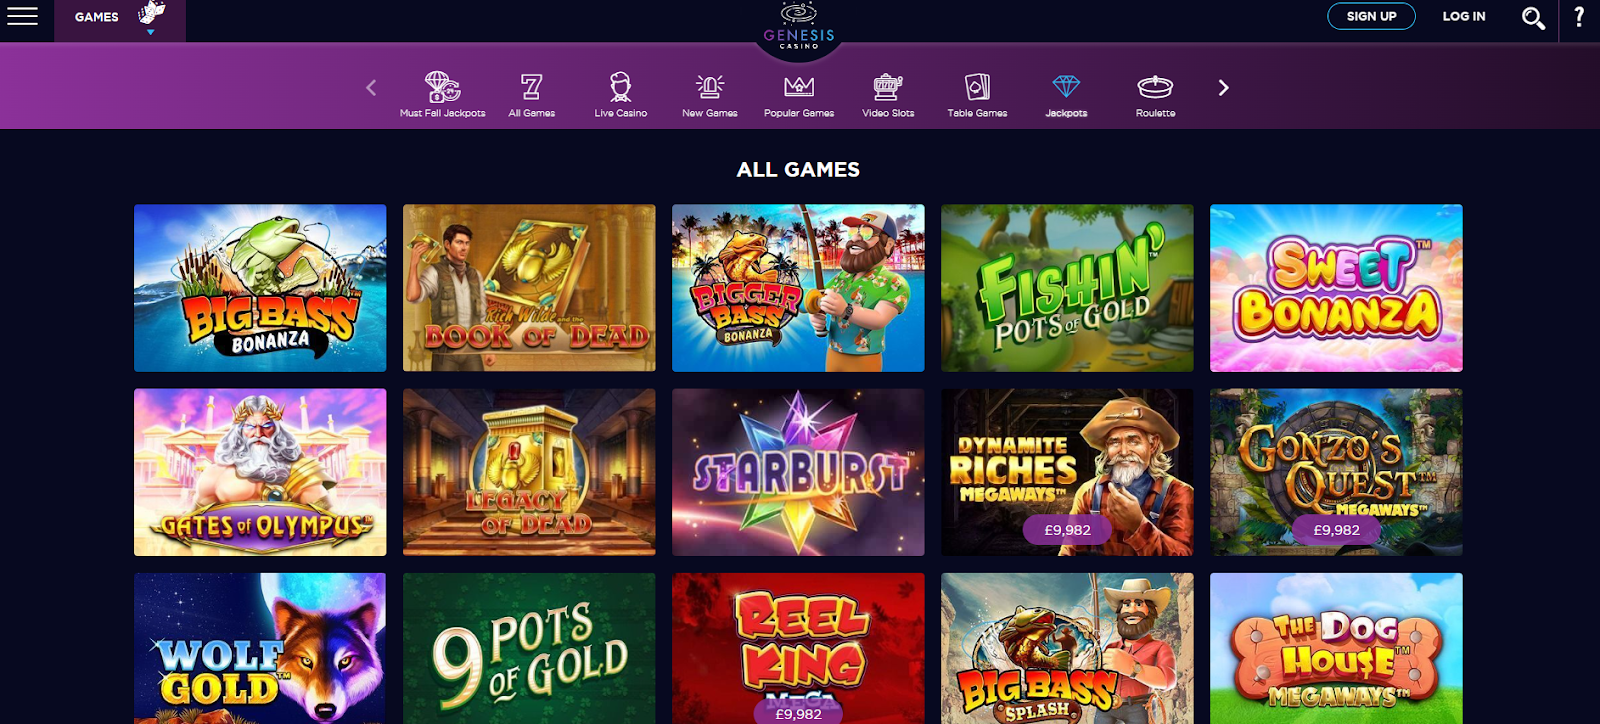 Genesis Casino has one of the best casino apps for Android users 